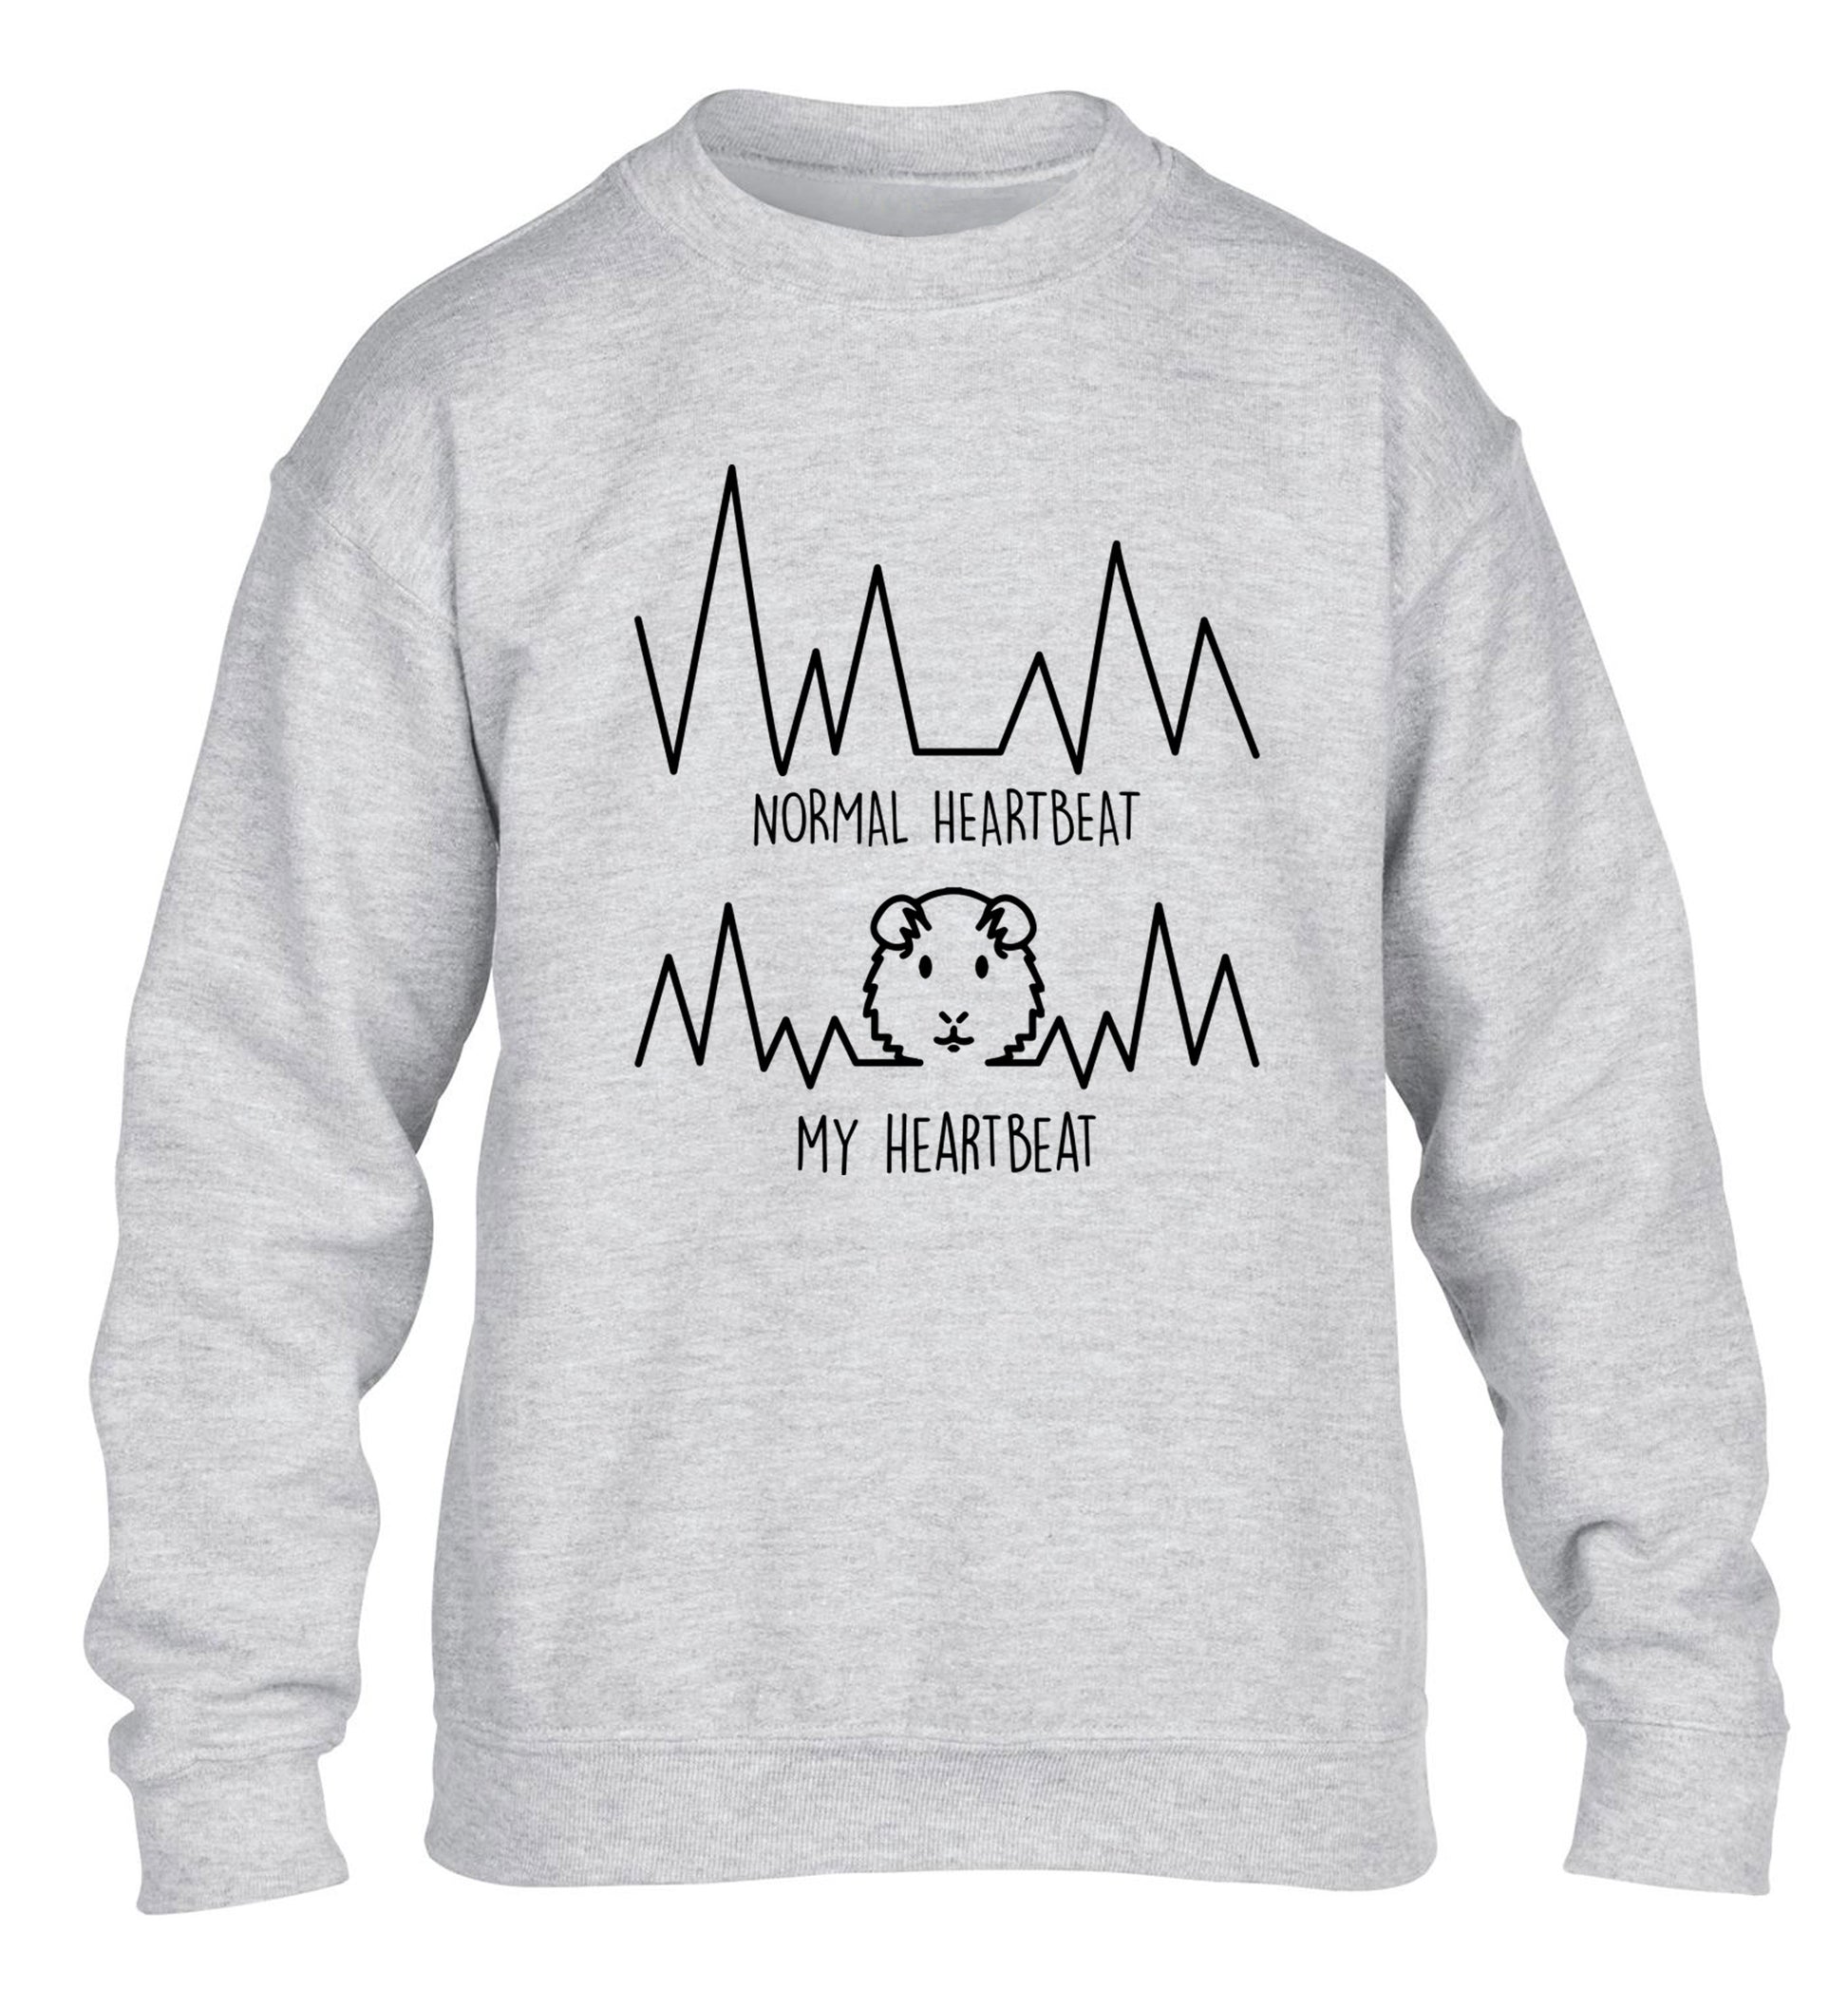 Normal heartbeat vs my heartbeat guinea pig lover children's grey  sweater 12-14 Years